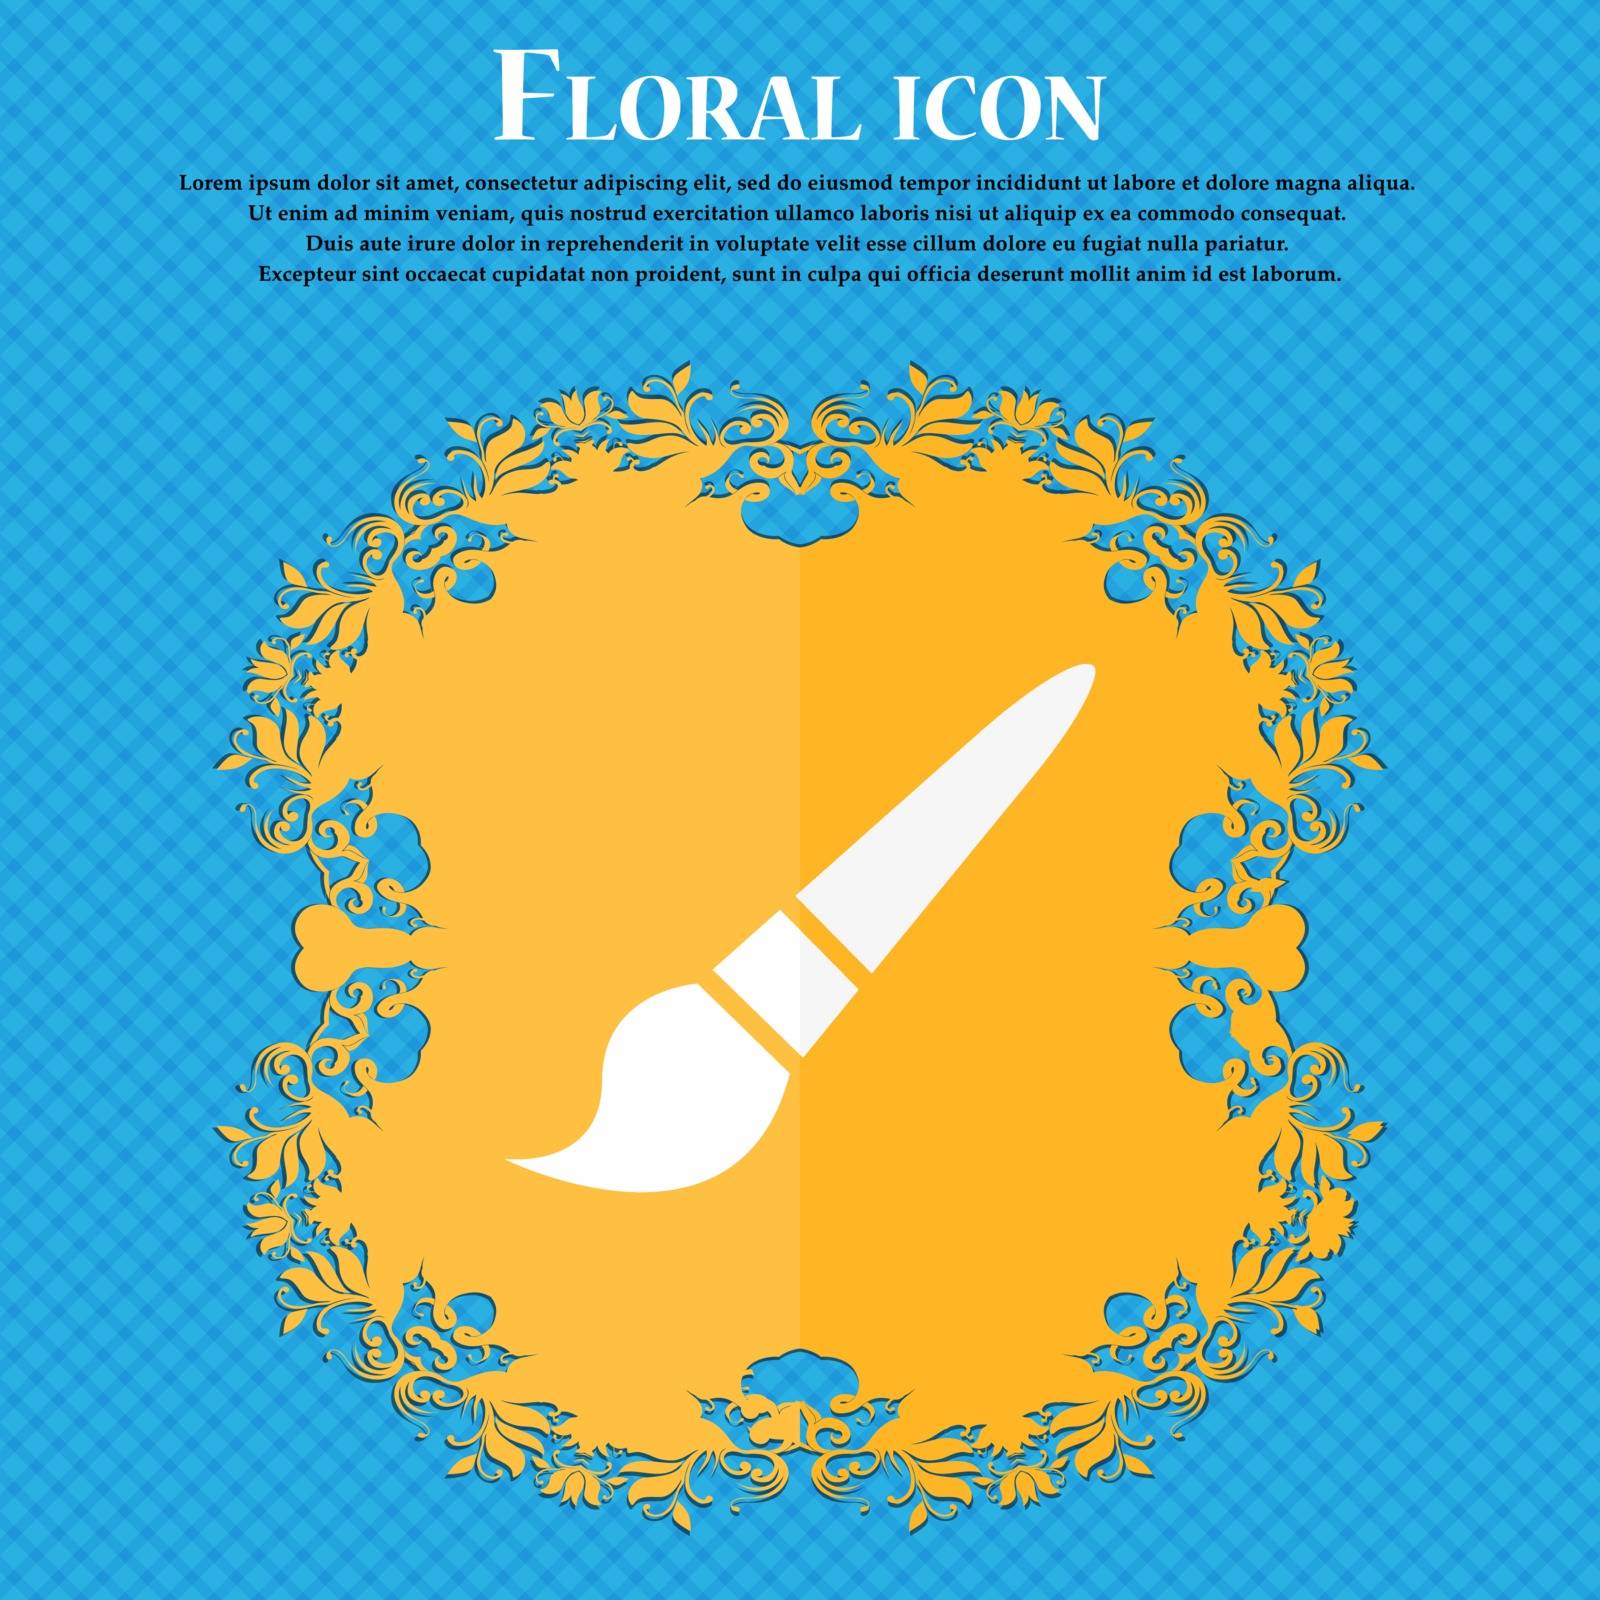 brush icon. Floral flat design on a blue abstract background with place for your text. Vector illustration